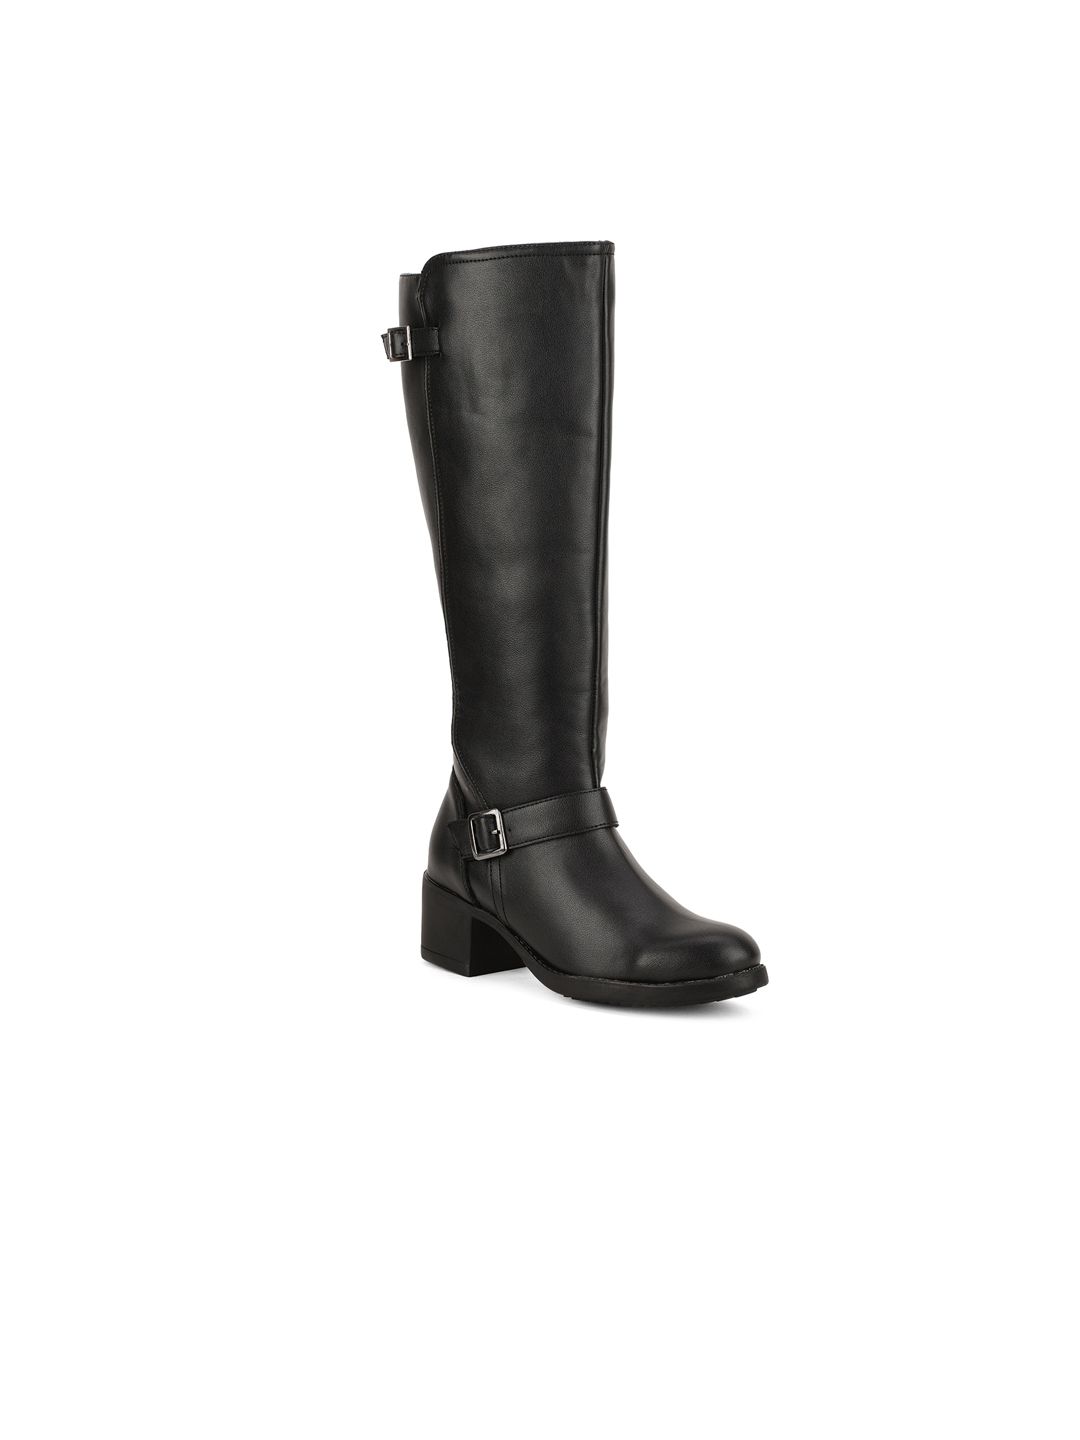 Bruno Manetti Black Leather High-Top Block Heeled Boots with Buckles Price in India